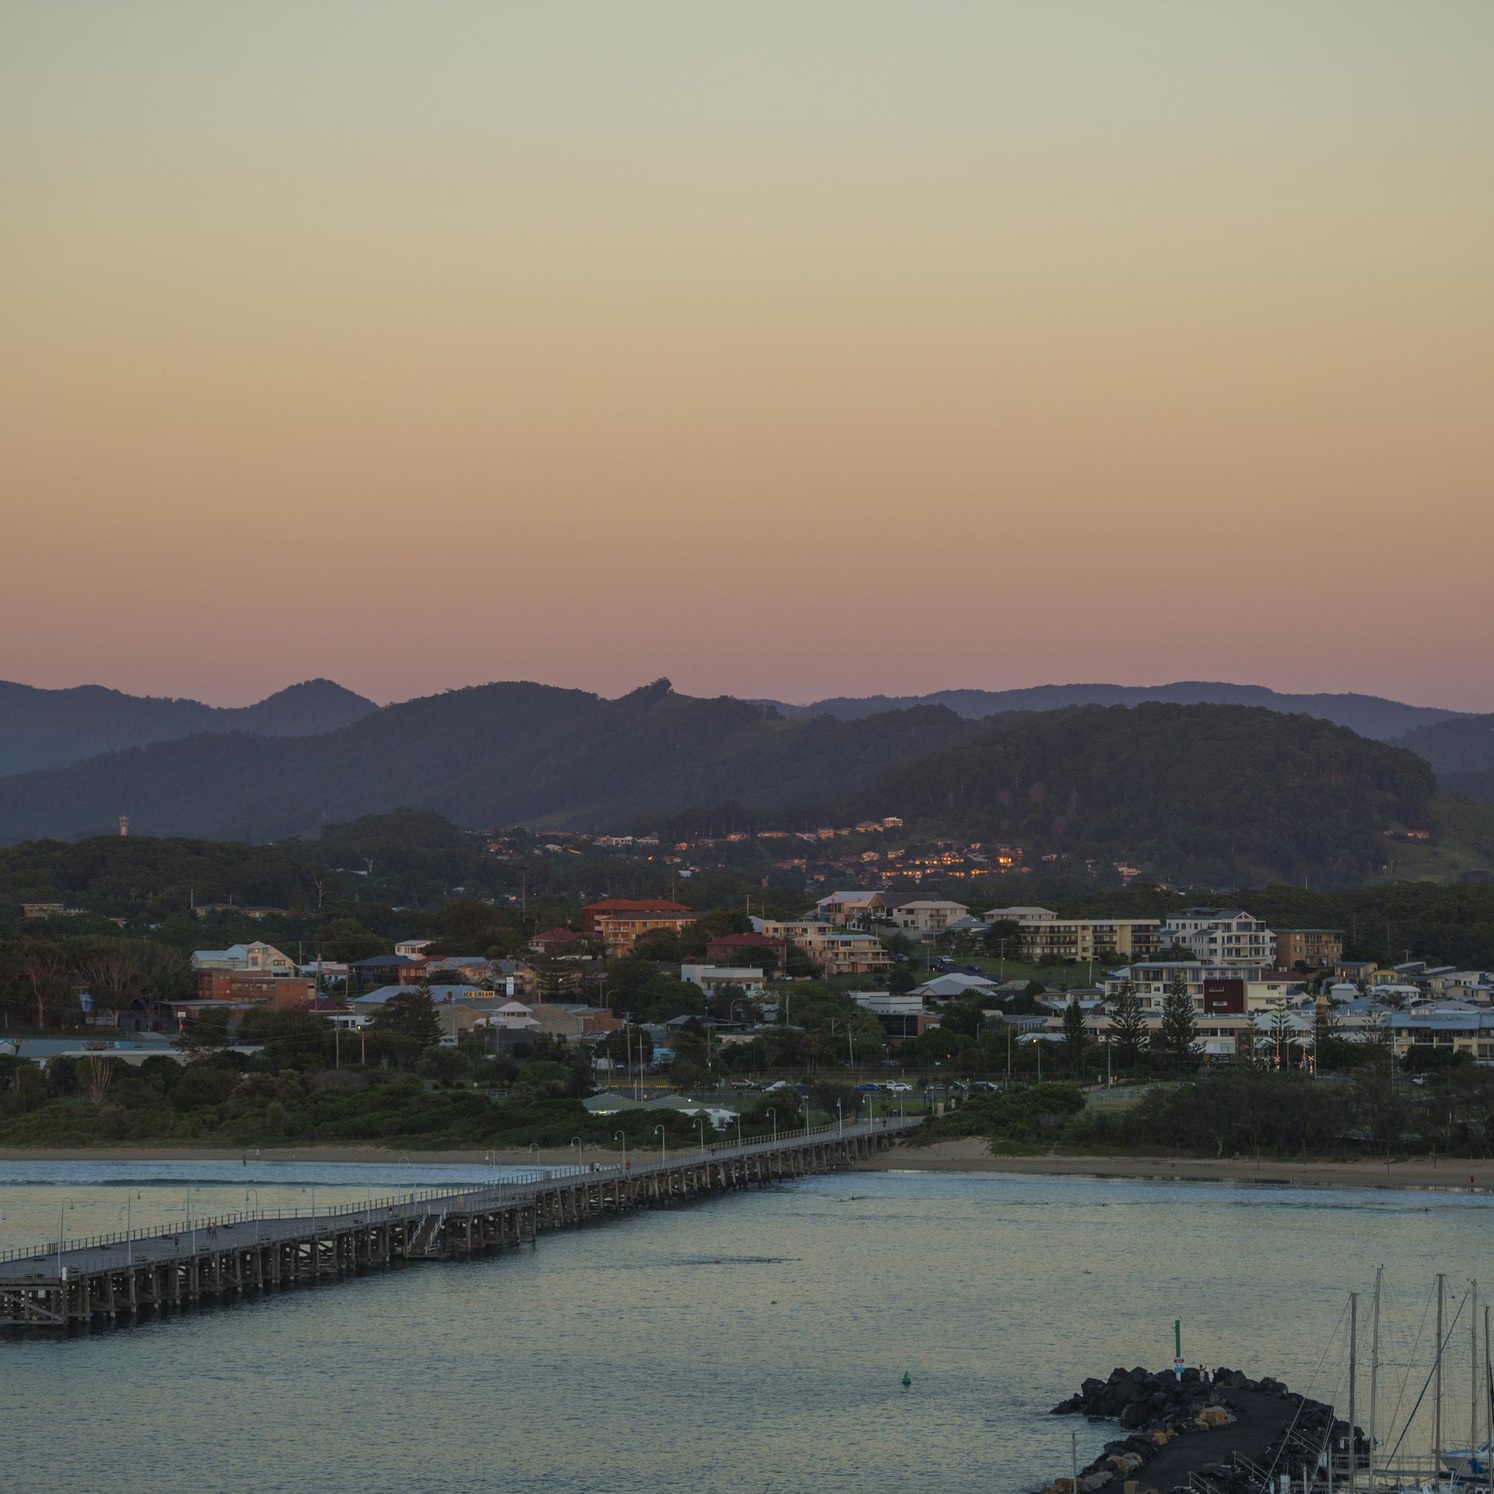 Coffs Harbour Jetty at sunset